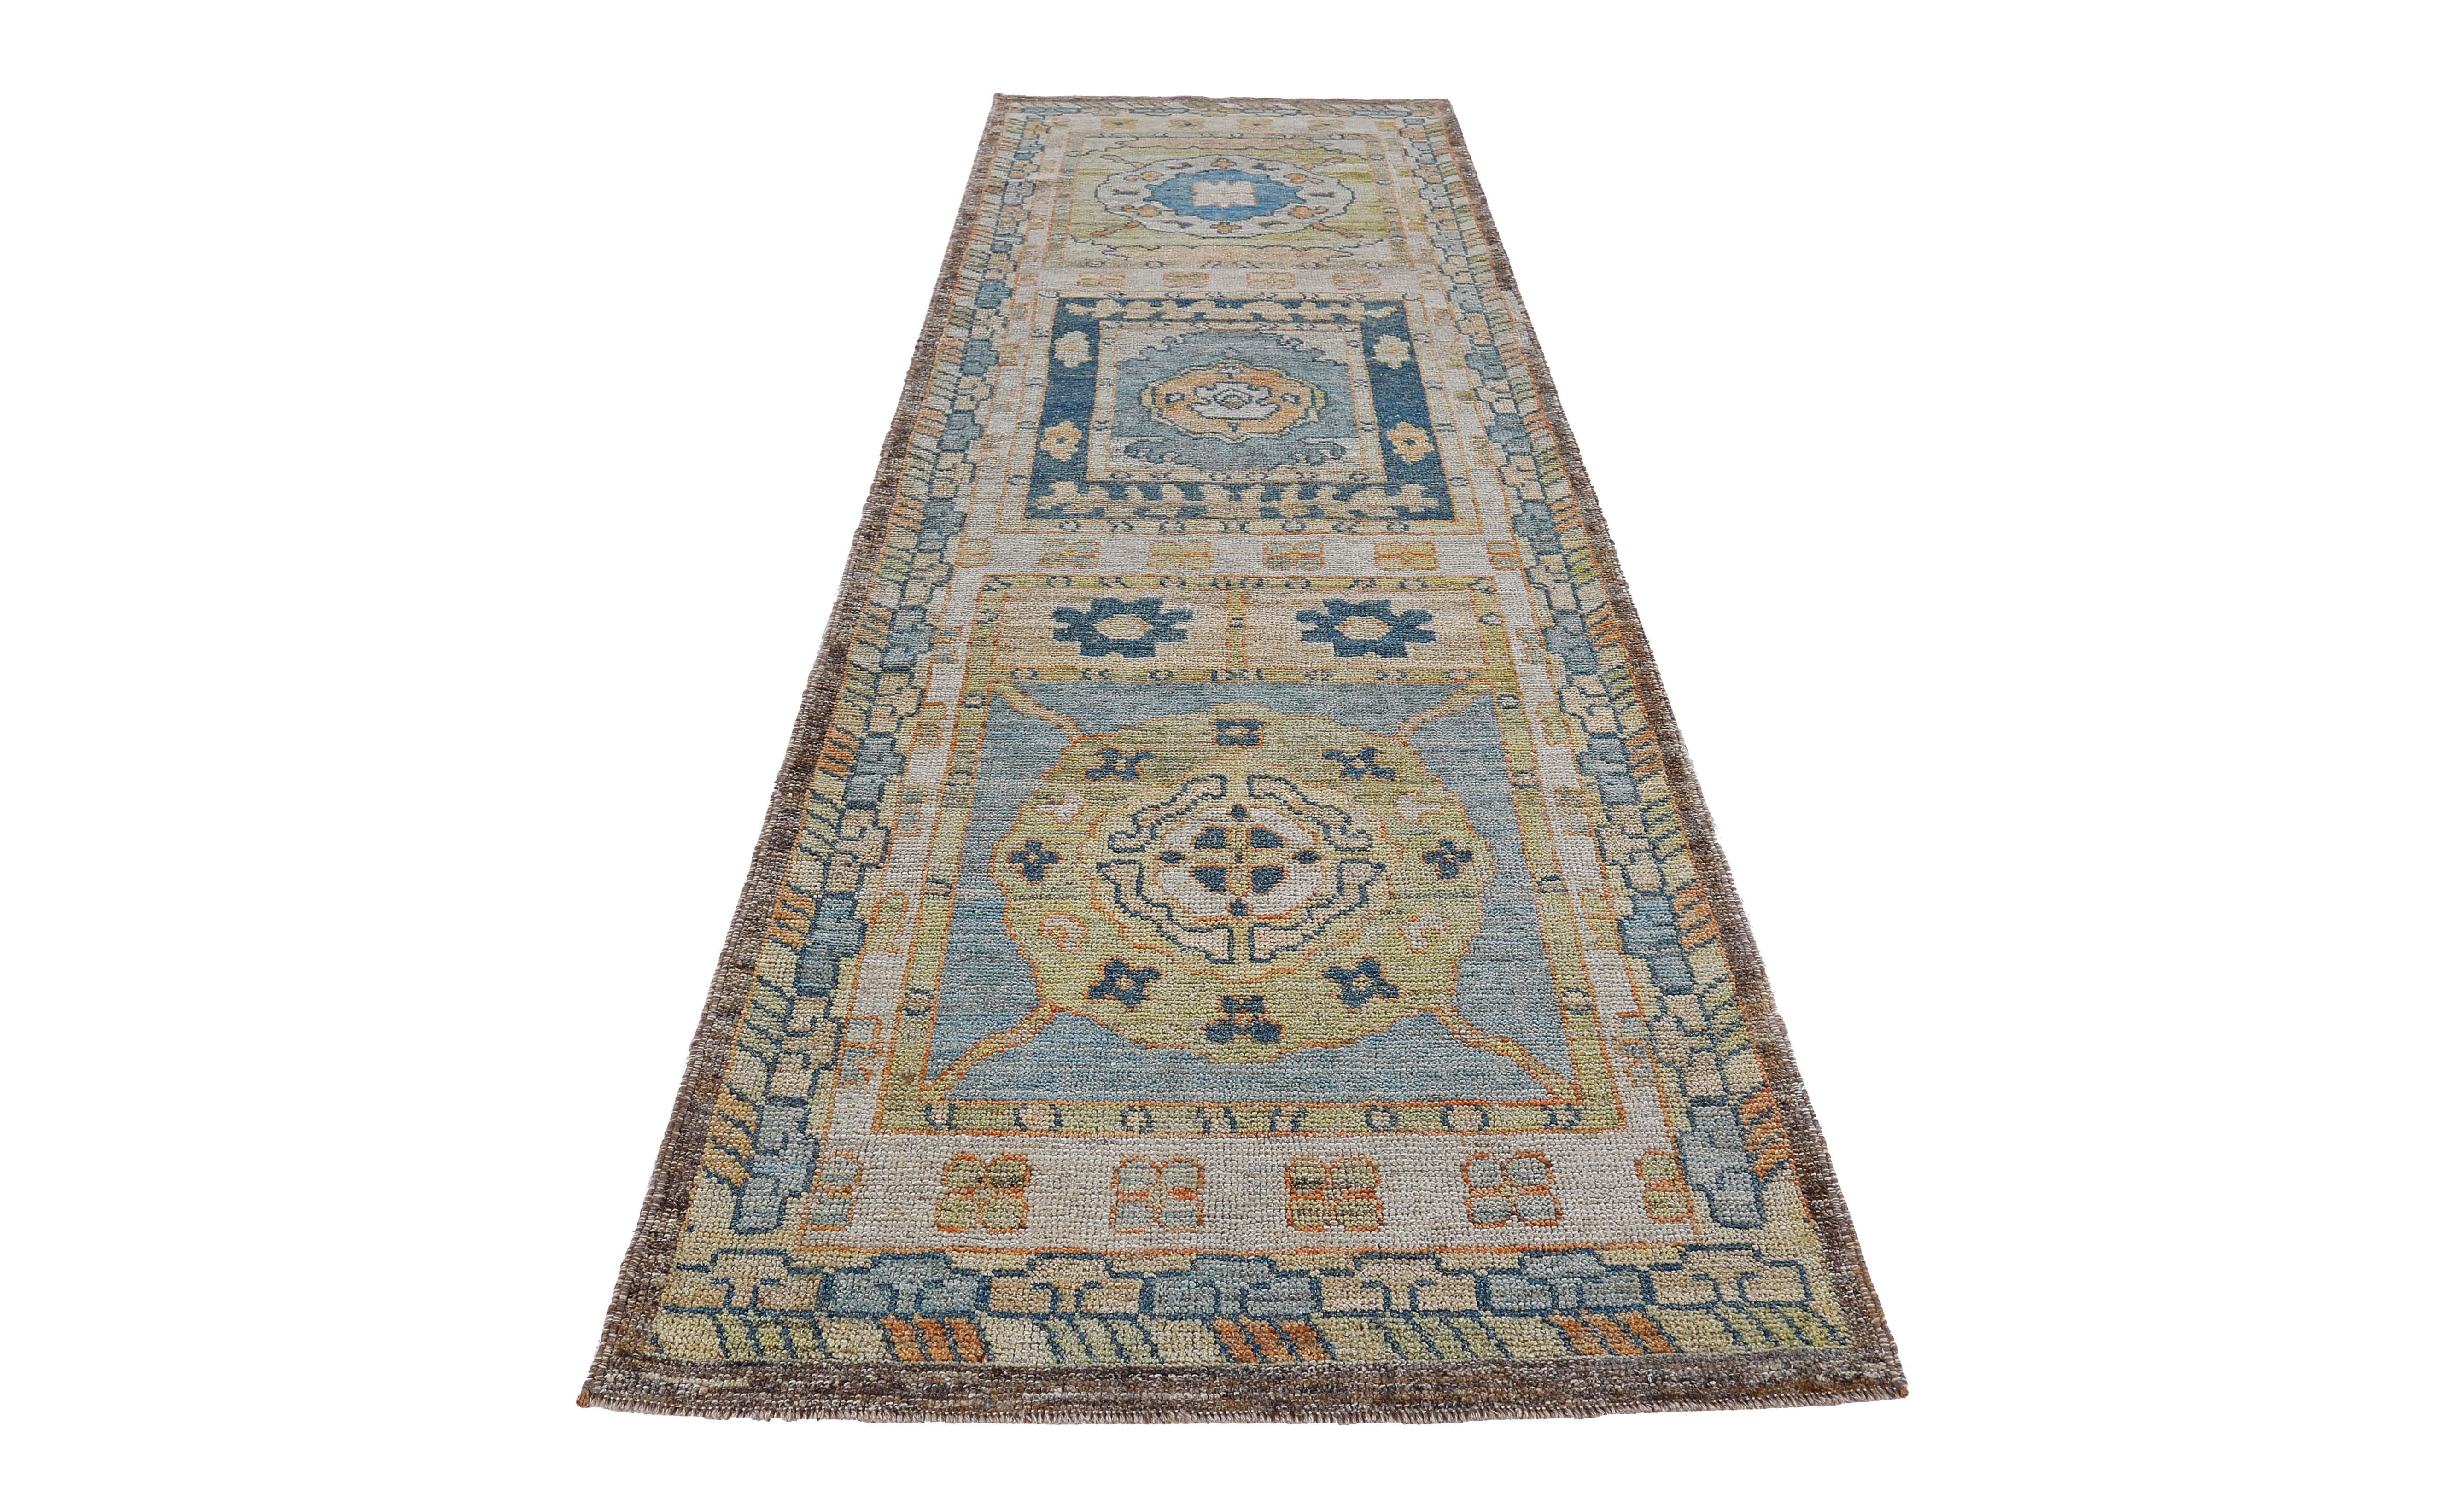 Turkish runner rug made of handwoven sheep’s wool of the finest quality. It’s colored with organic vegetable dyes that are certified safe for humans and pets alike. It features blue and orange floral patterns on a beautiful beige and brown field.